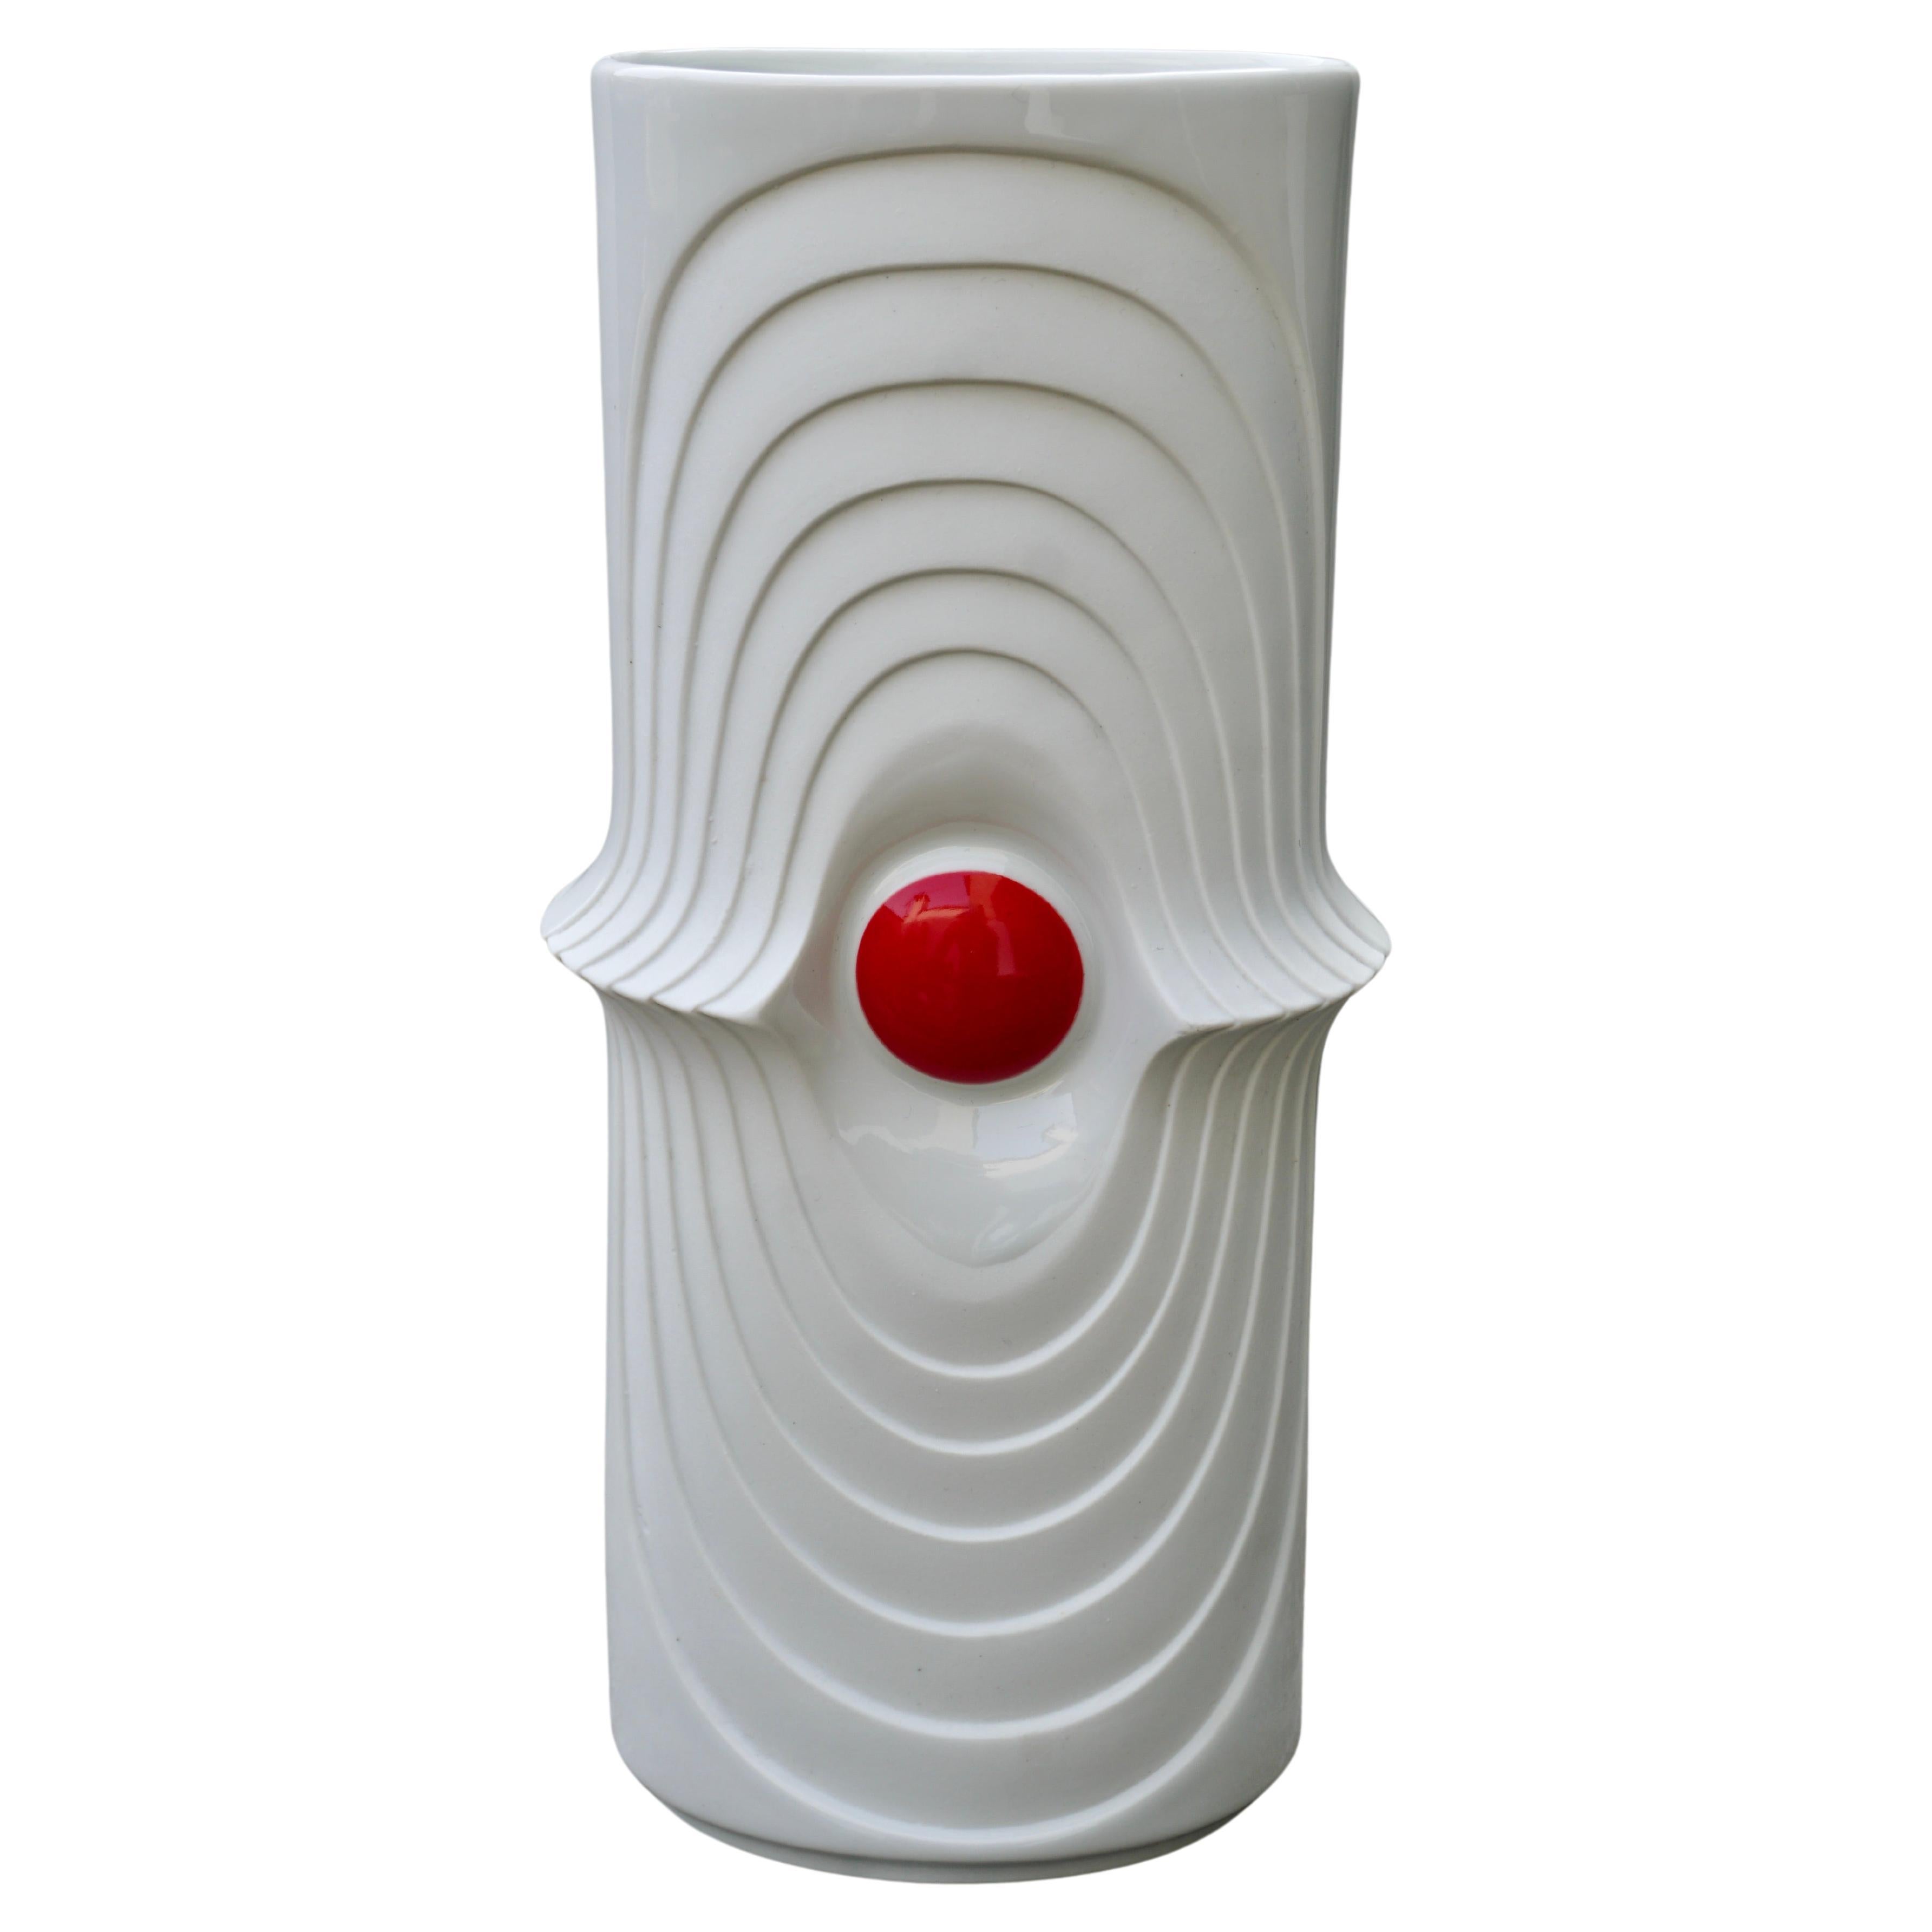 Royal KPM Bavaria Porzellan bisque hand-made Mid Century Modern Germany porcelain vase.

This original vintage OP Art vase was produced in the 1970s in Germany. It is made of porcelain with an OP Art abstract formed surface. The bottom is marked